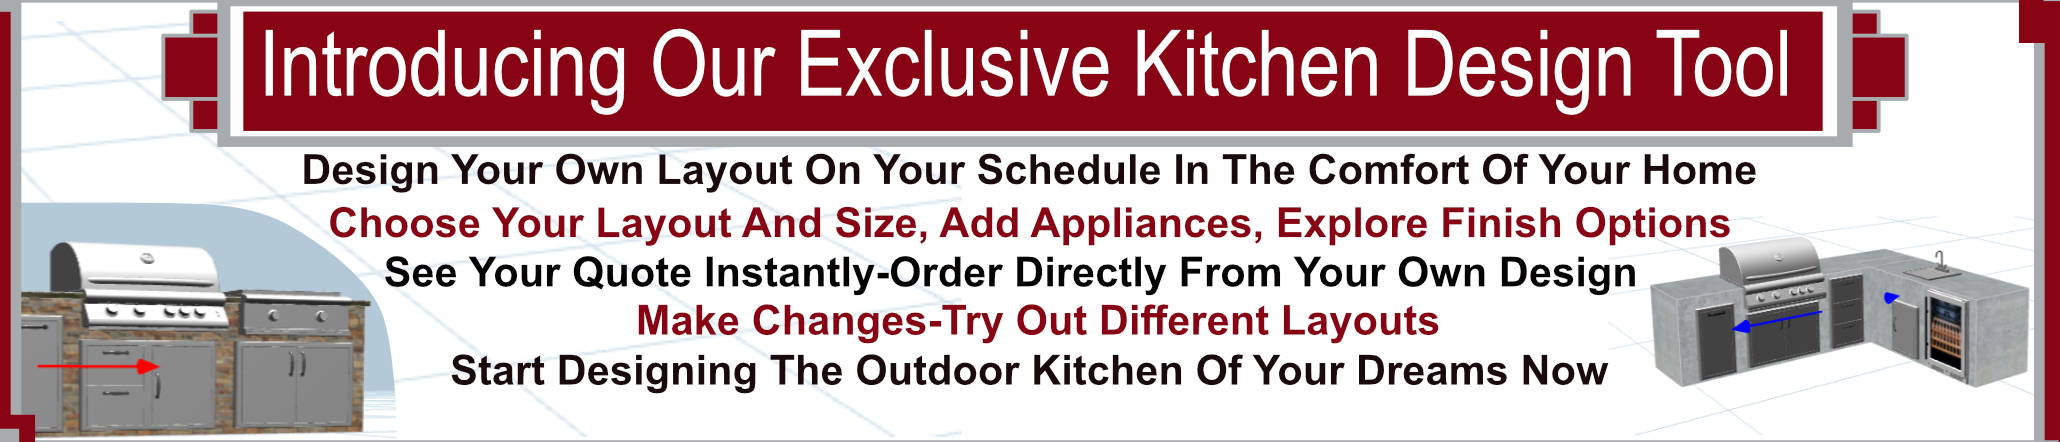 Try Our Exclusive Kitchen Design Tool